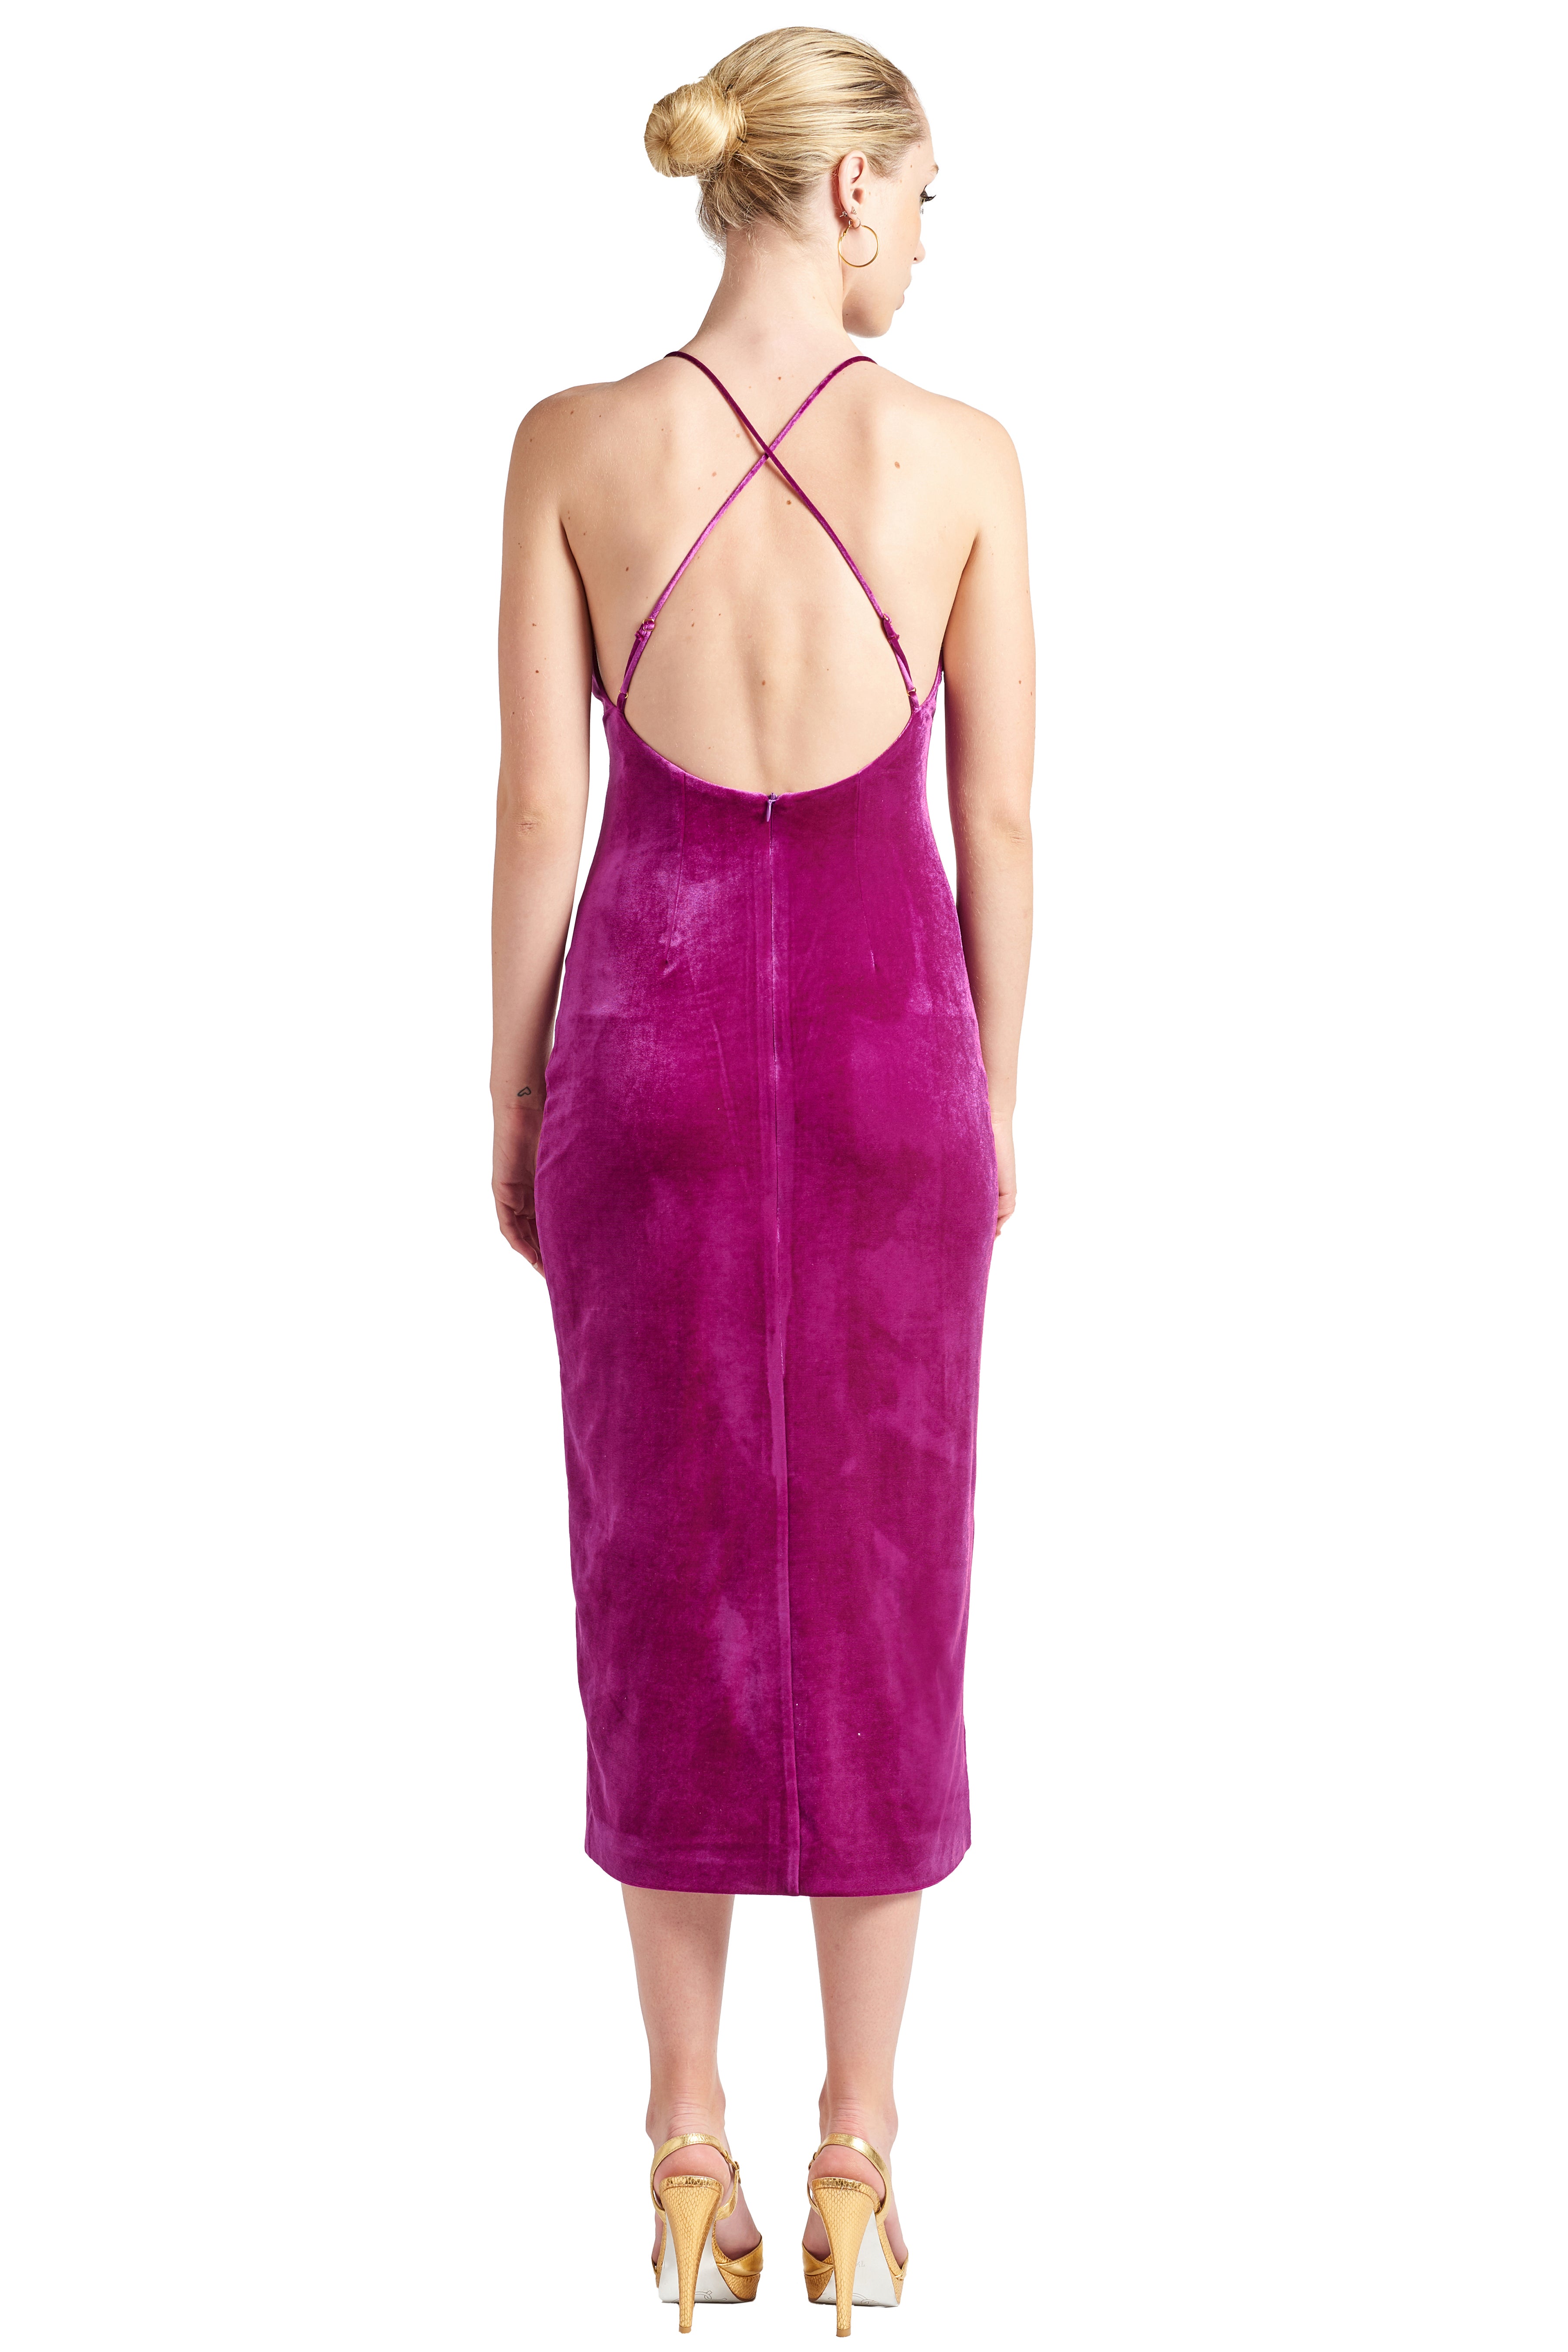 Back view of model wearing magenta stretch velvet midi dress with low back & criss cross adjustable spaghetti straps.